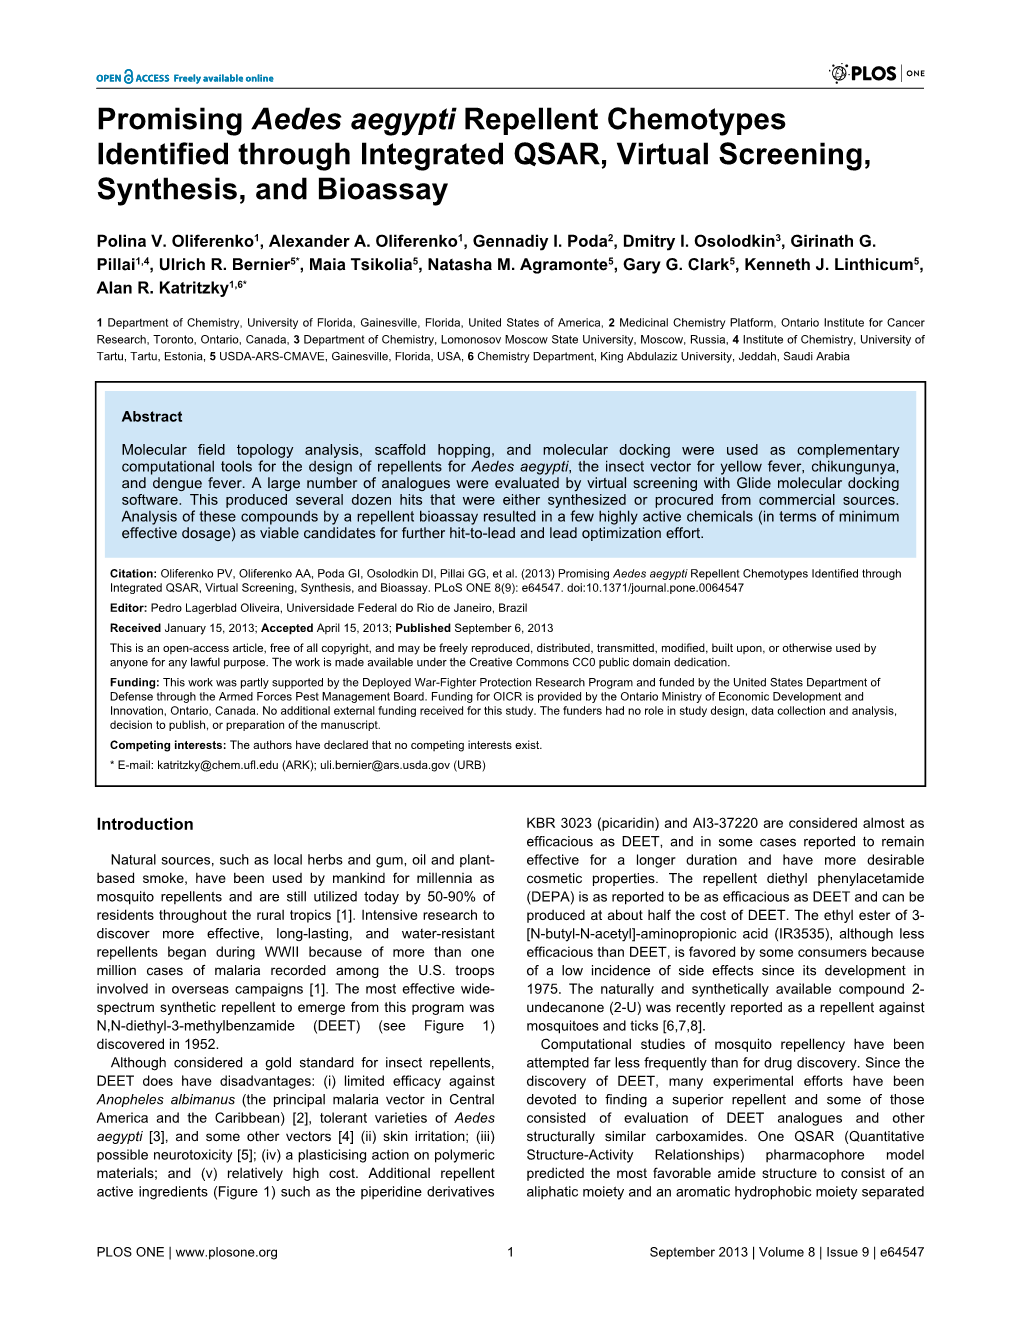 Promising Aedes Aegypti Repellent Chemotypes Identified Through Integrated QSAR, Virtual Screening, Synthesis, and Bioassay